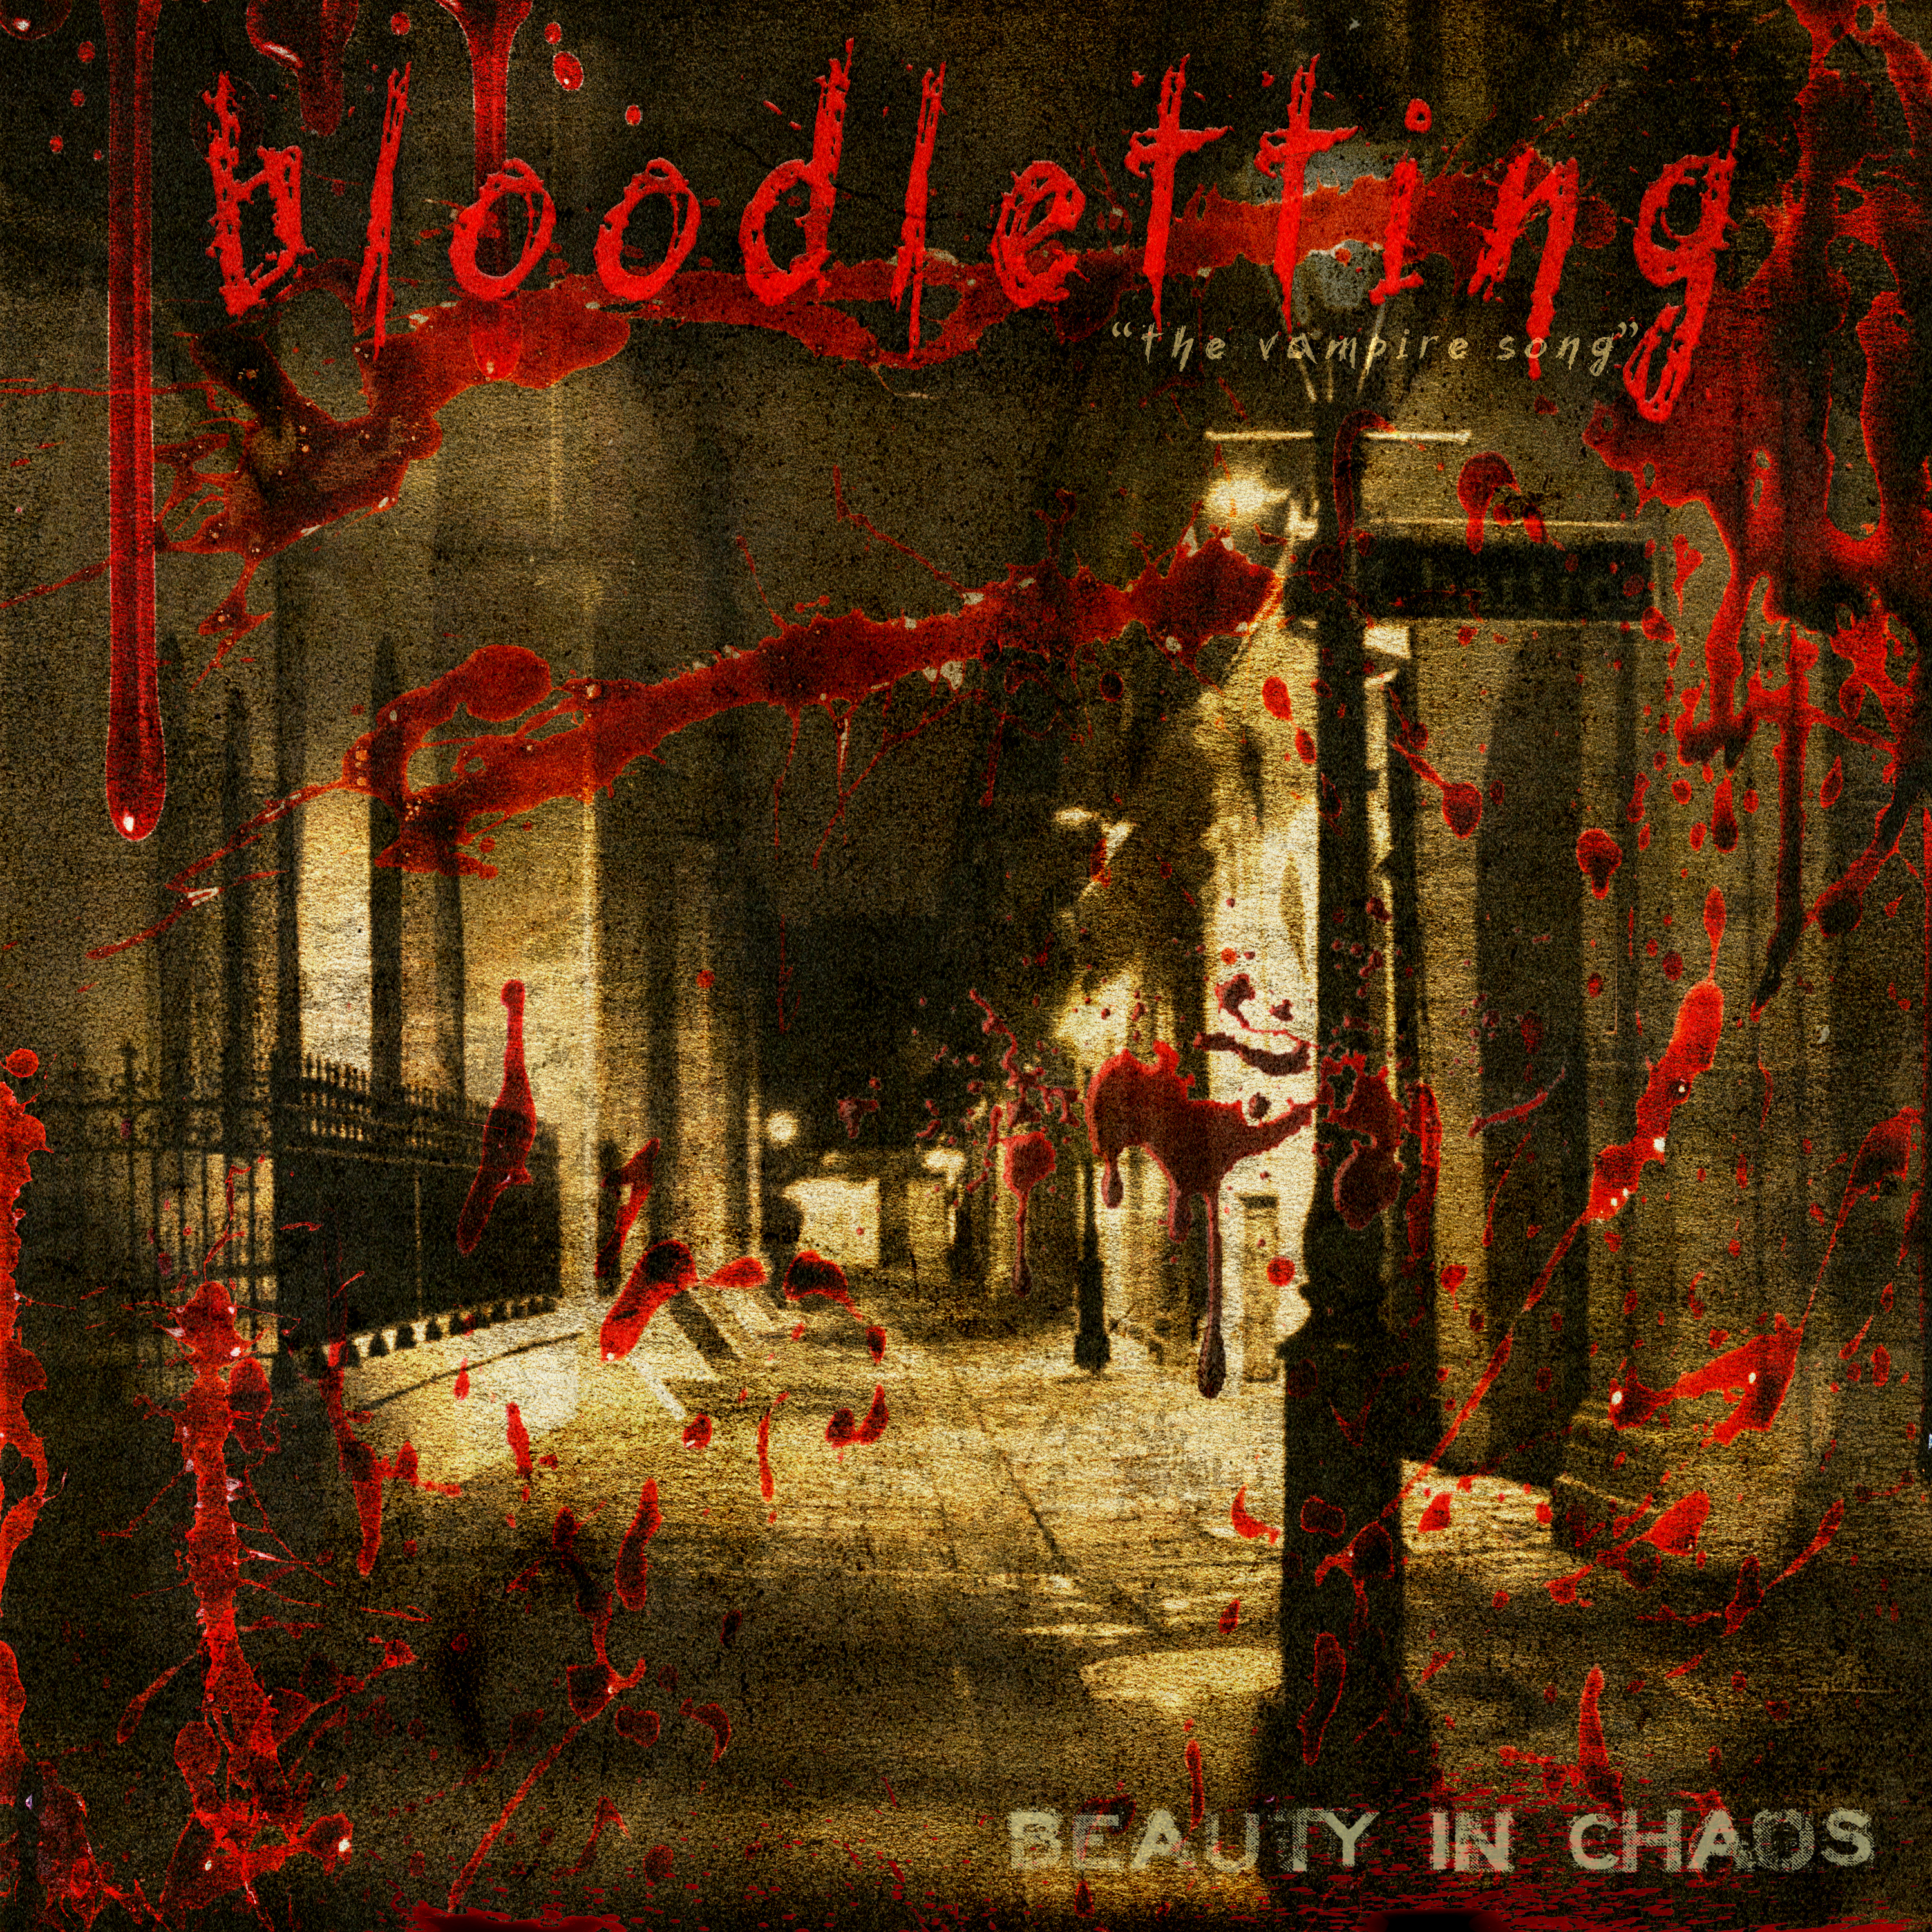 Art for Bloodletting by Beauty In Chaos